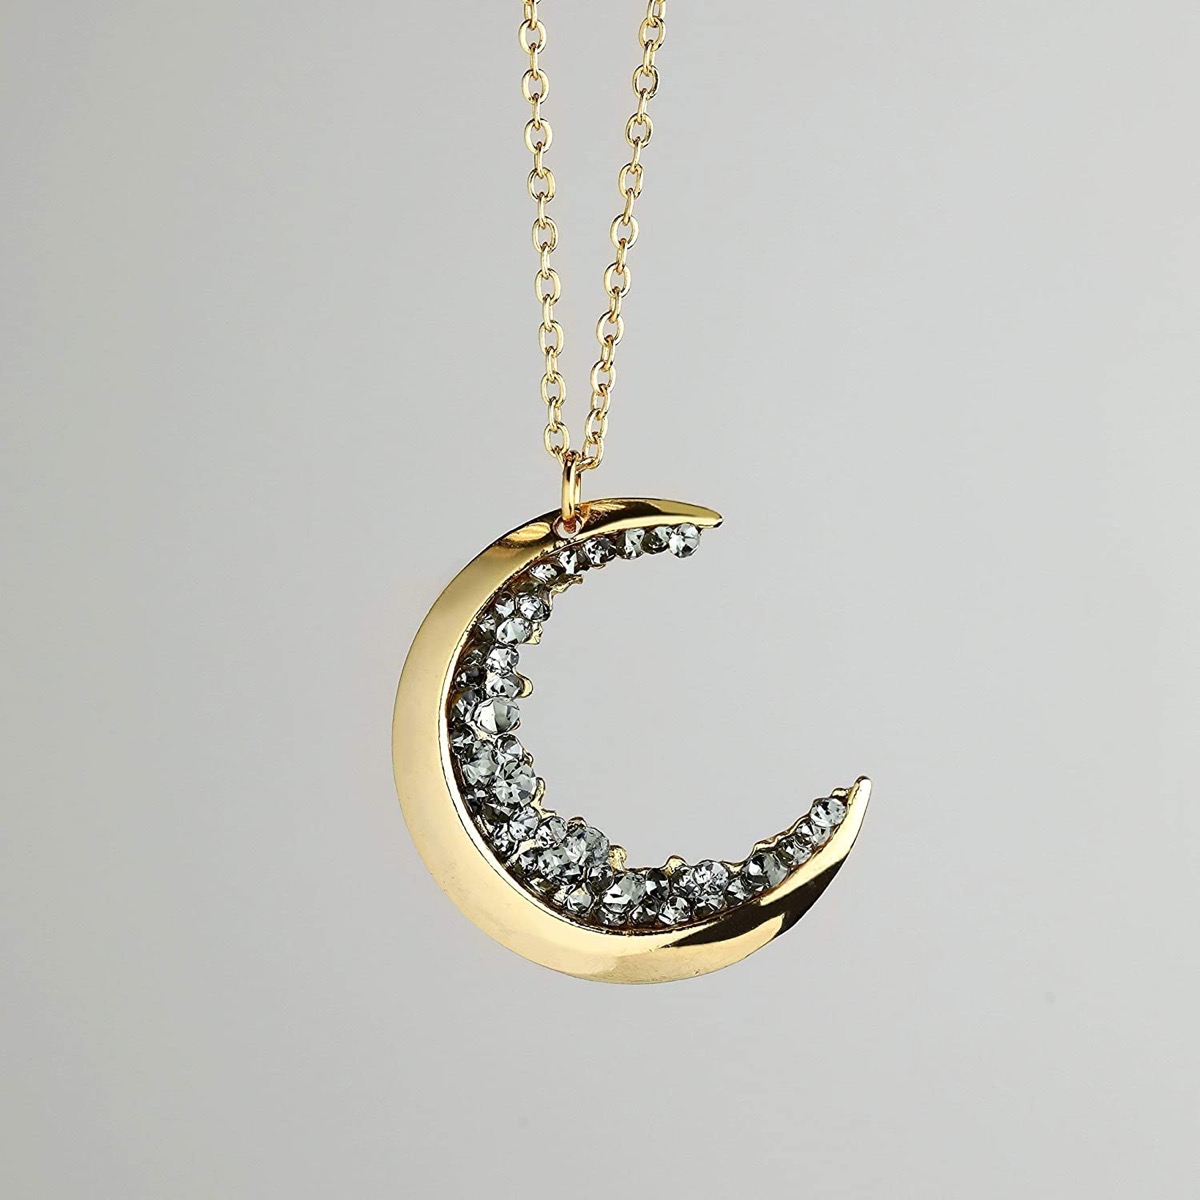 gold half moon necklace with black jewels